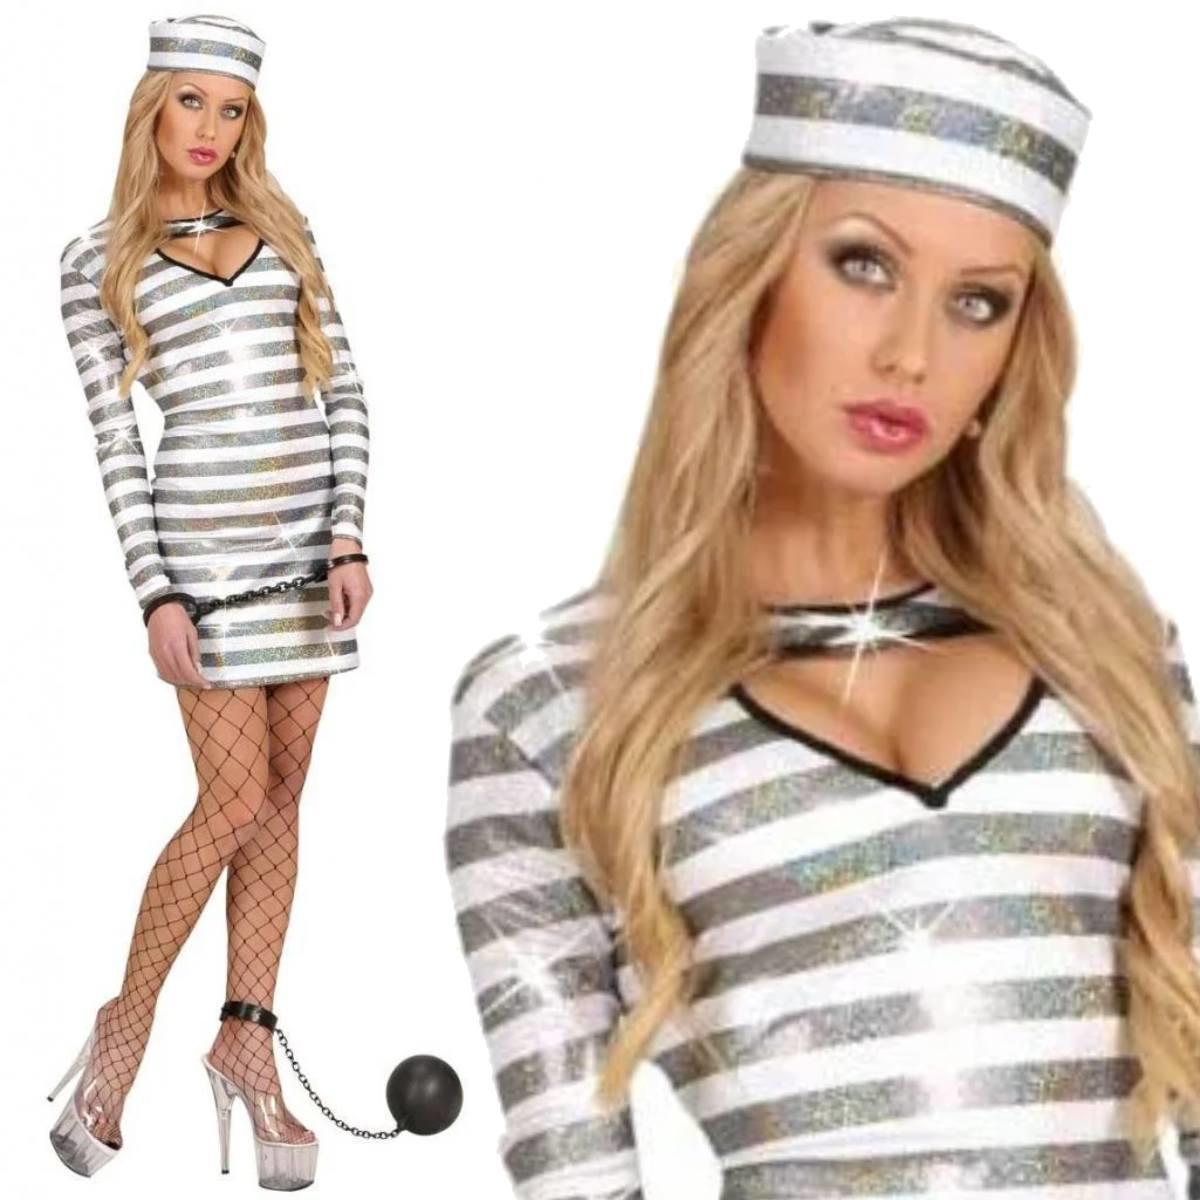 Holographic Jailbird Costume for Women by Widmann 7727 from a collection of Convicts Costumes at Karnival Costumes online party shop